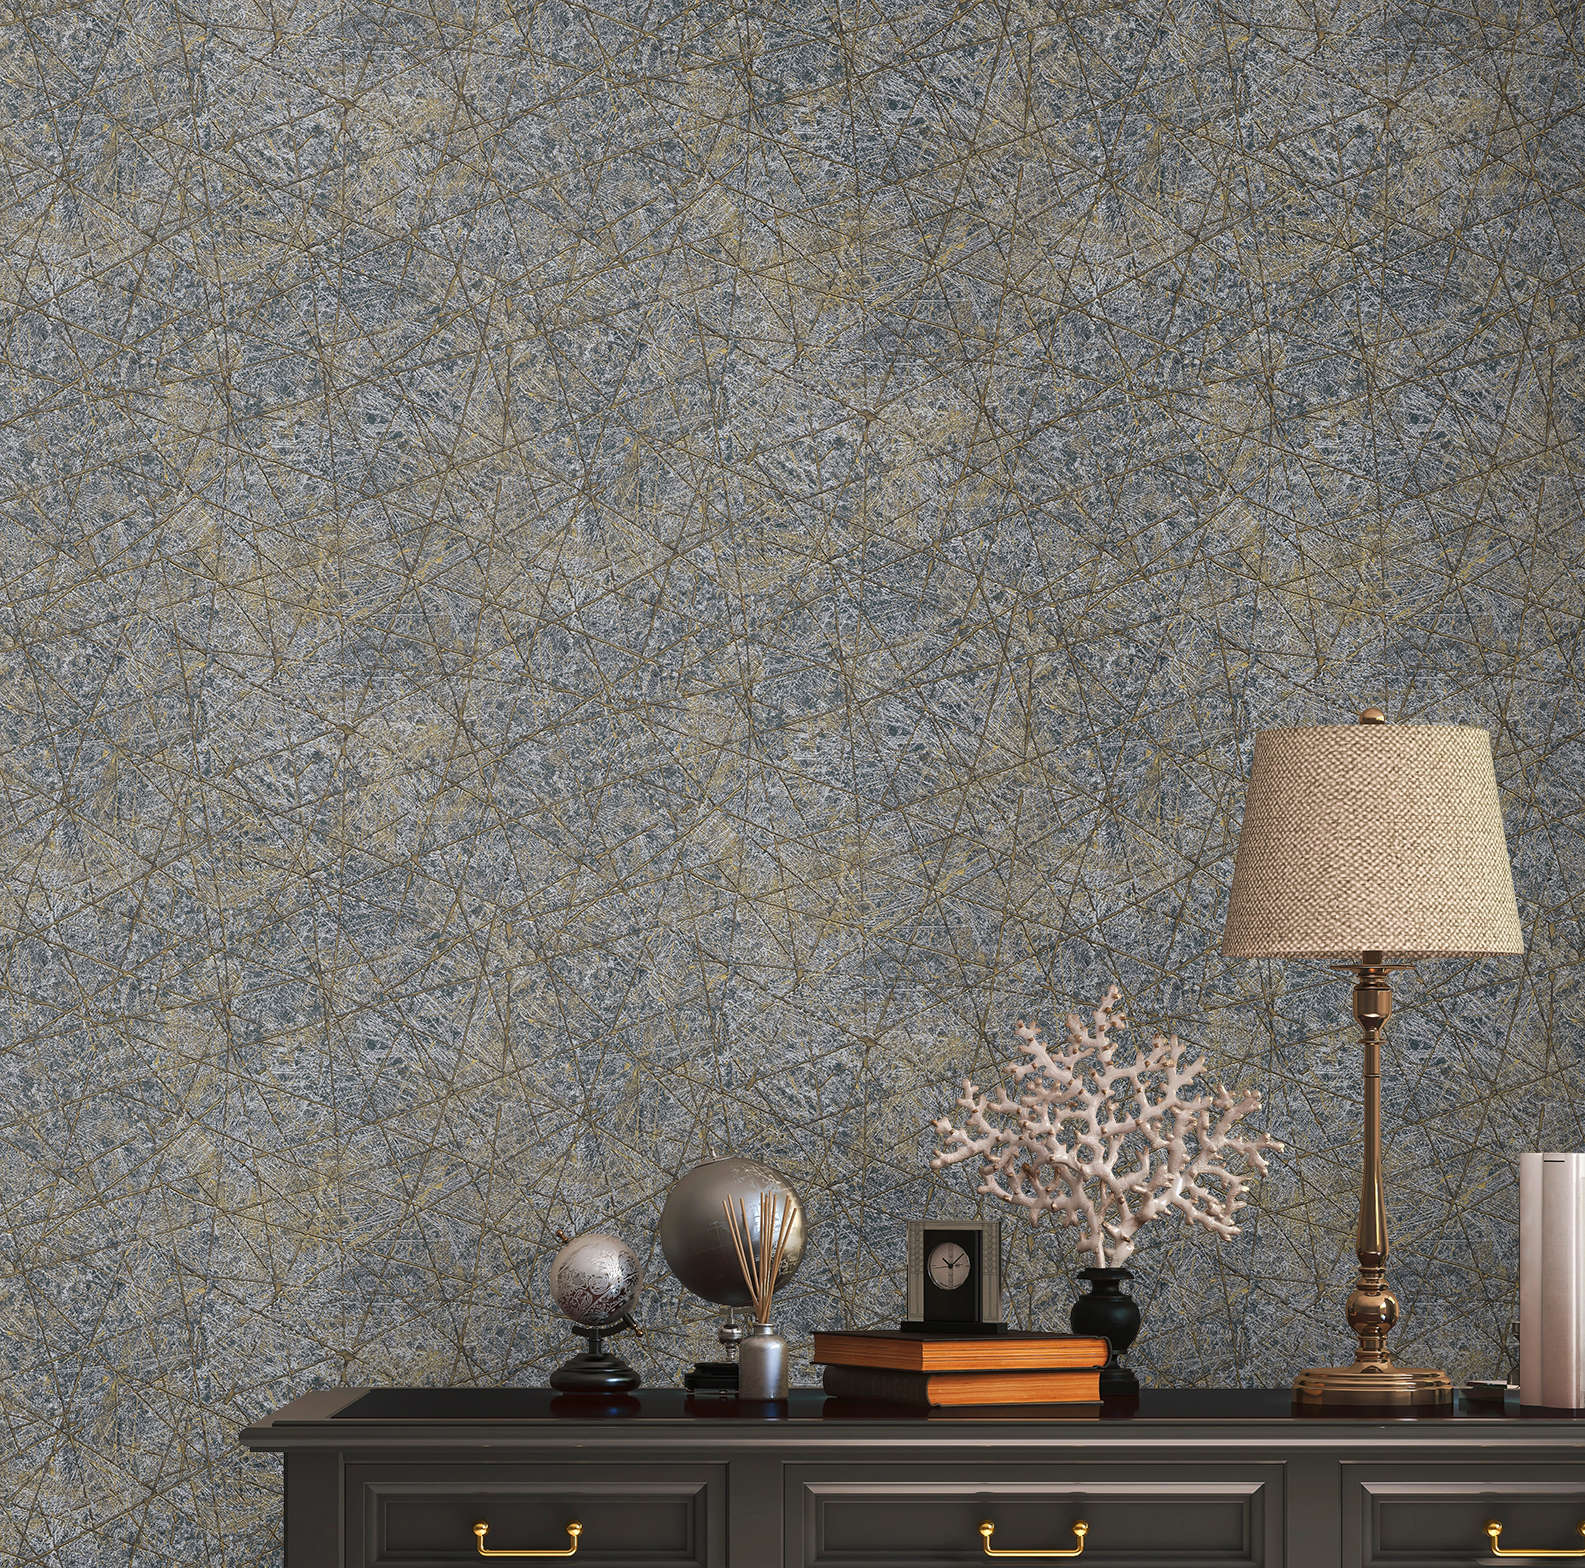             Non-woven wallpaper with abstract graphic pattern - black, gold, silver
        